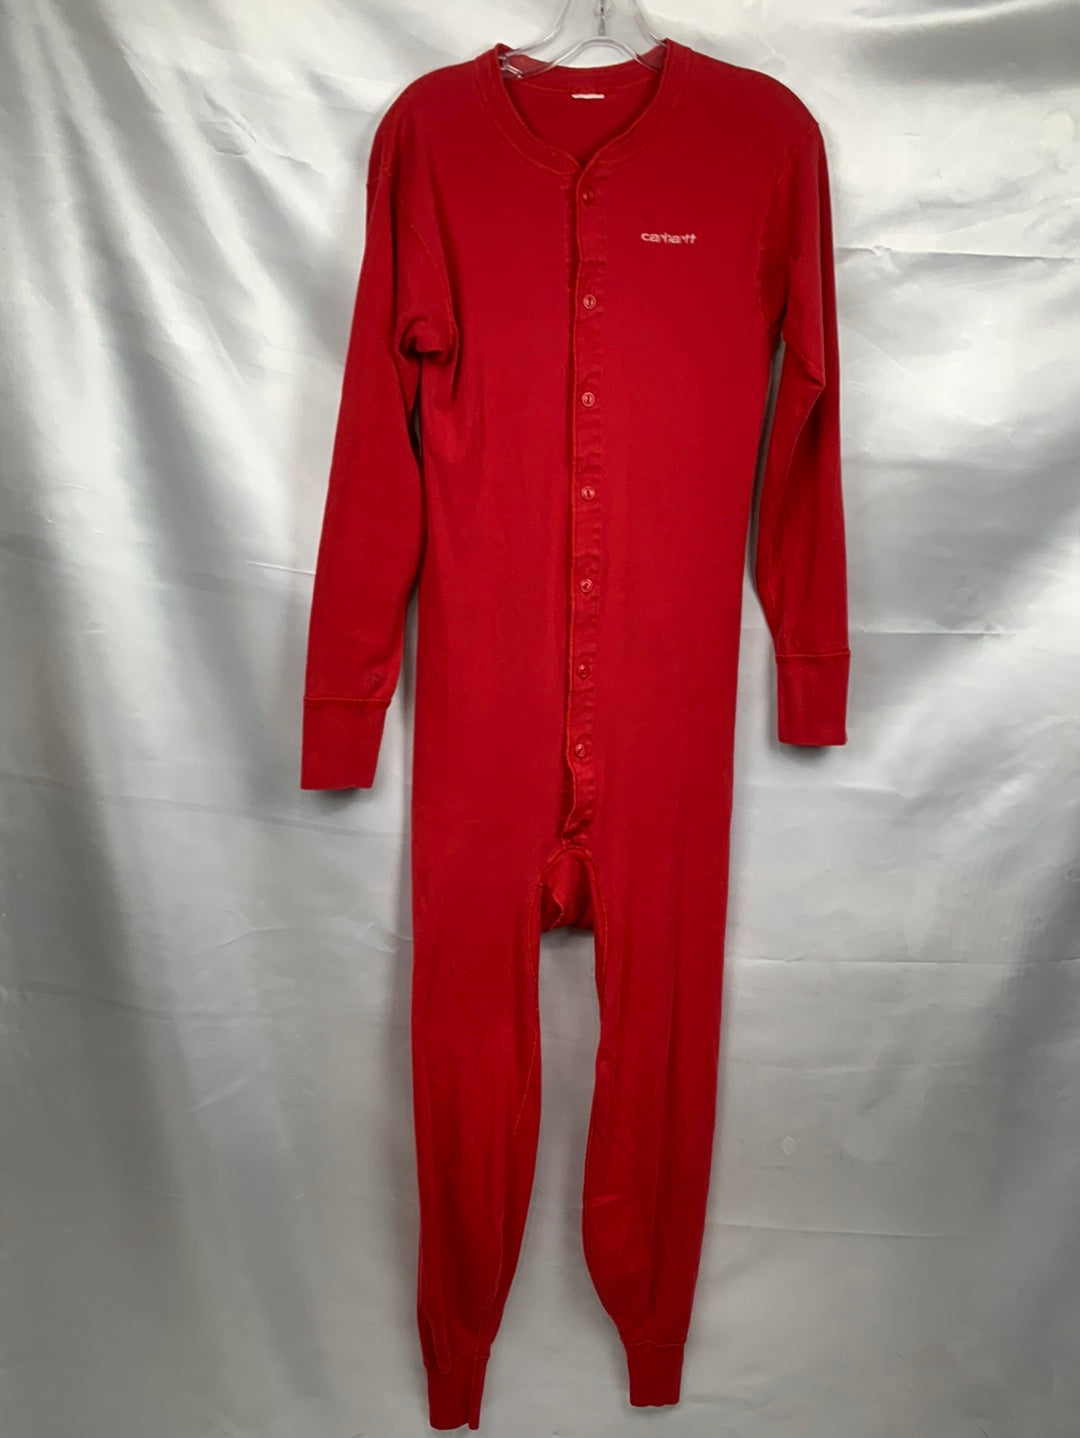 Union Suit Long Johns Thermal Underwear Mens 38 -40 Red – The